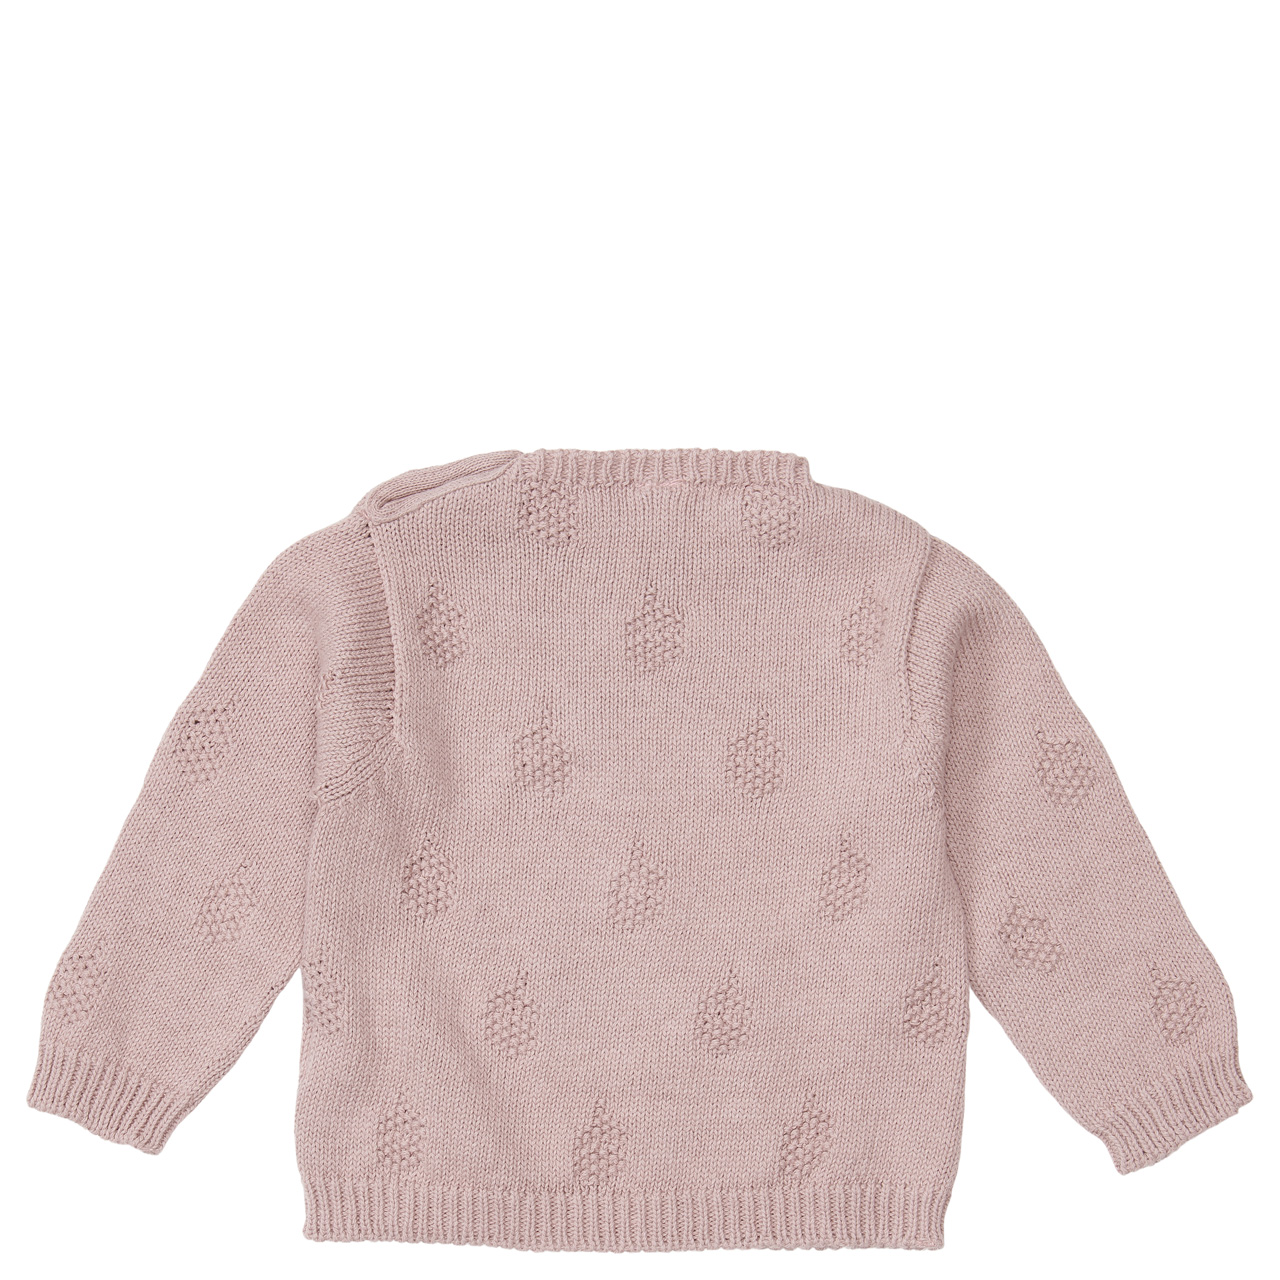 Baby sweater Nuts soft mauve